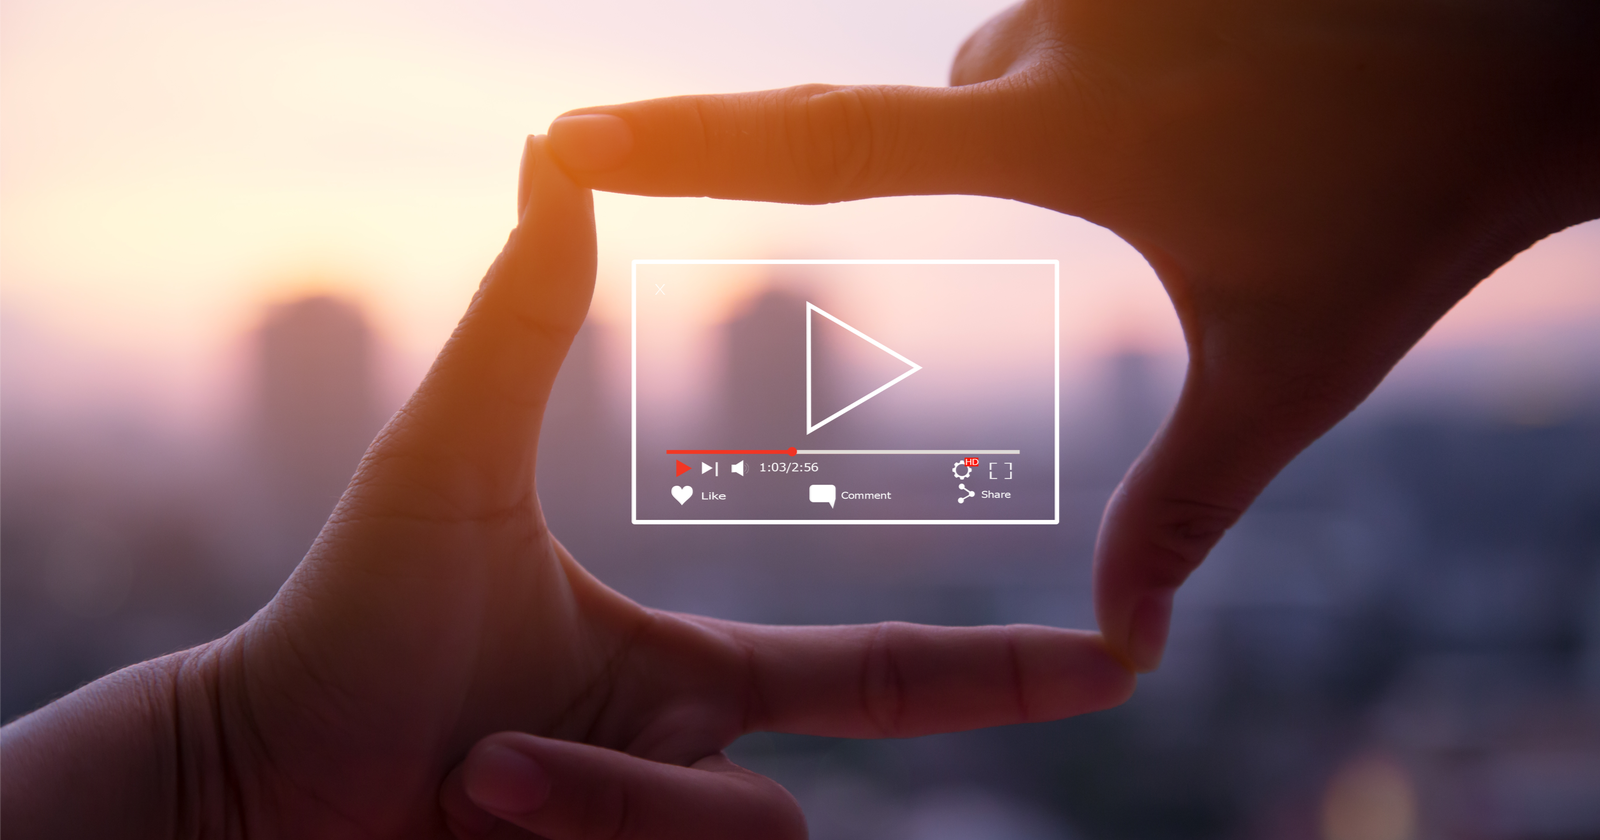 How Digital Video Advertising Will Dominate The Next Decade via @sejournal, @cchaitanya